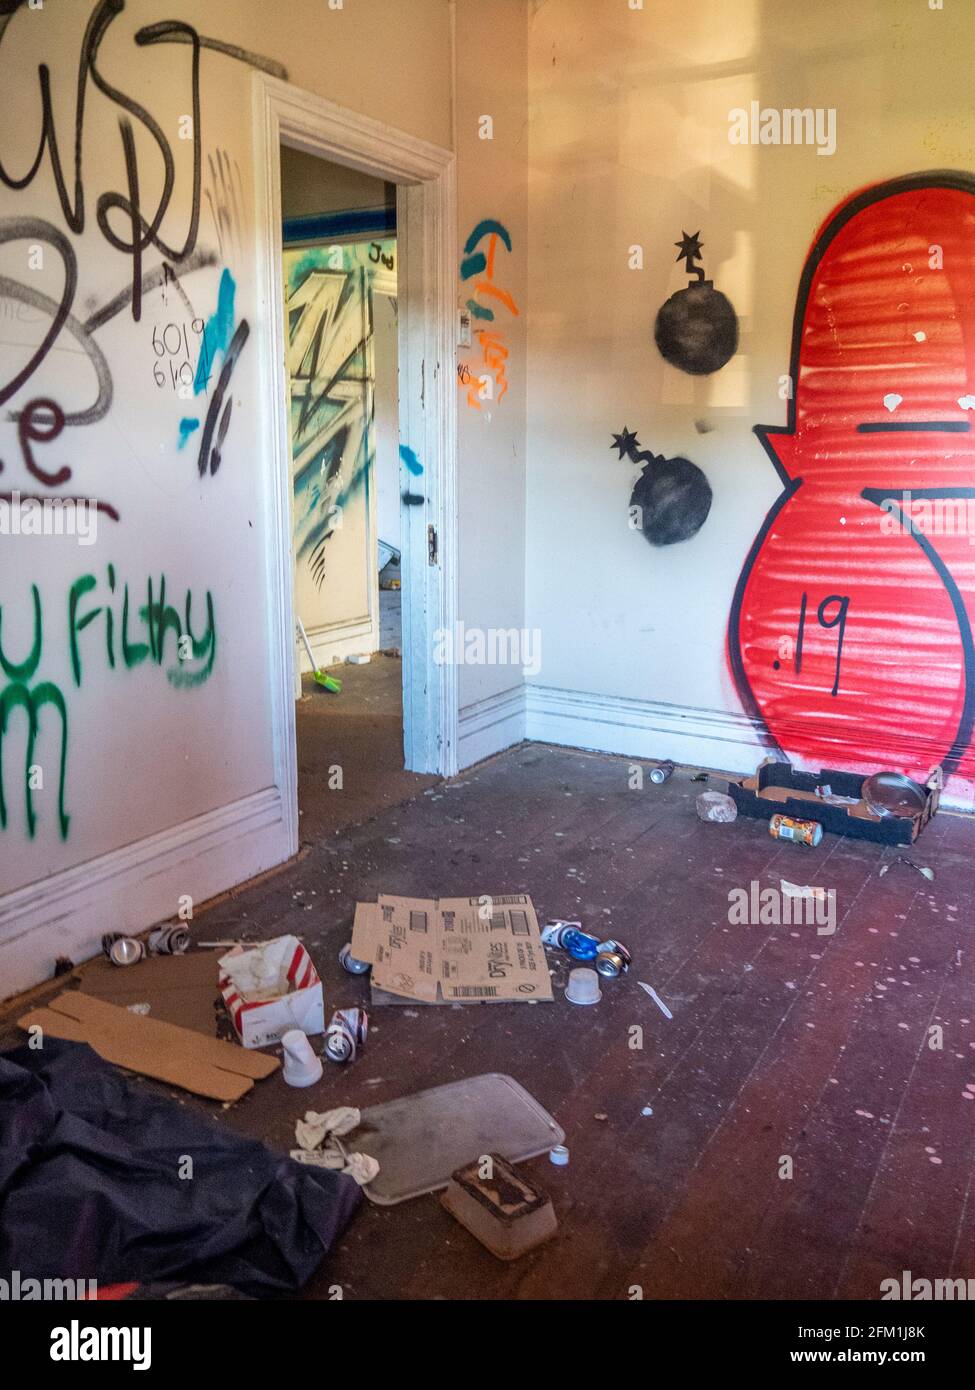 Litter on floor and graffiti and tags on wall in an abandoned house. Stock Photo